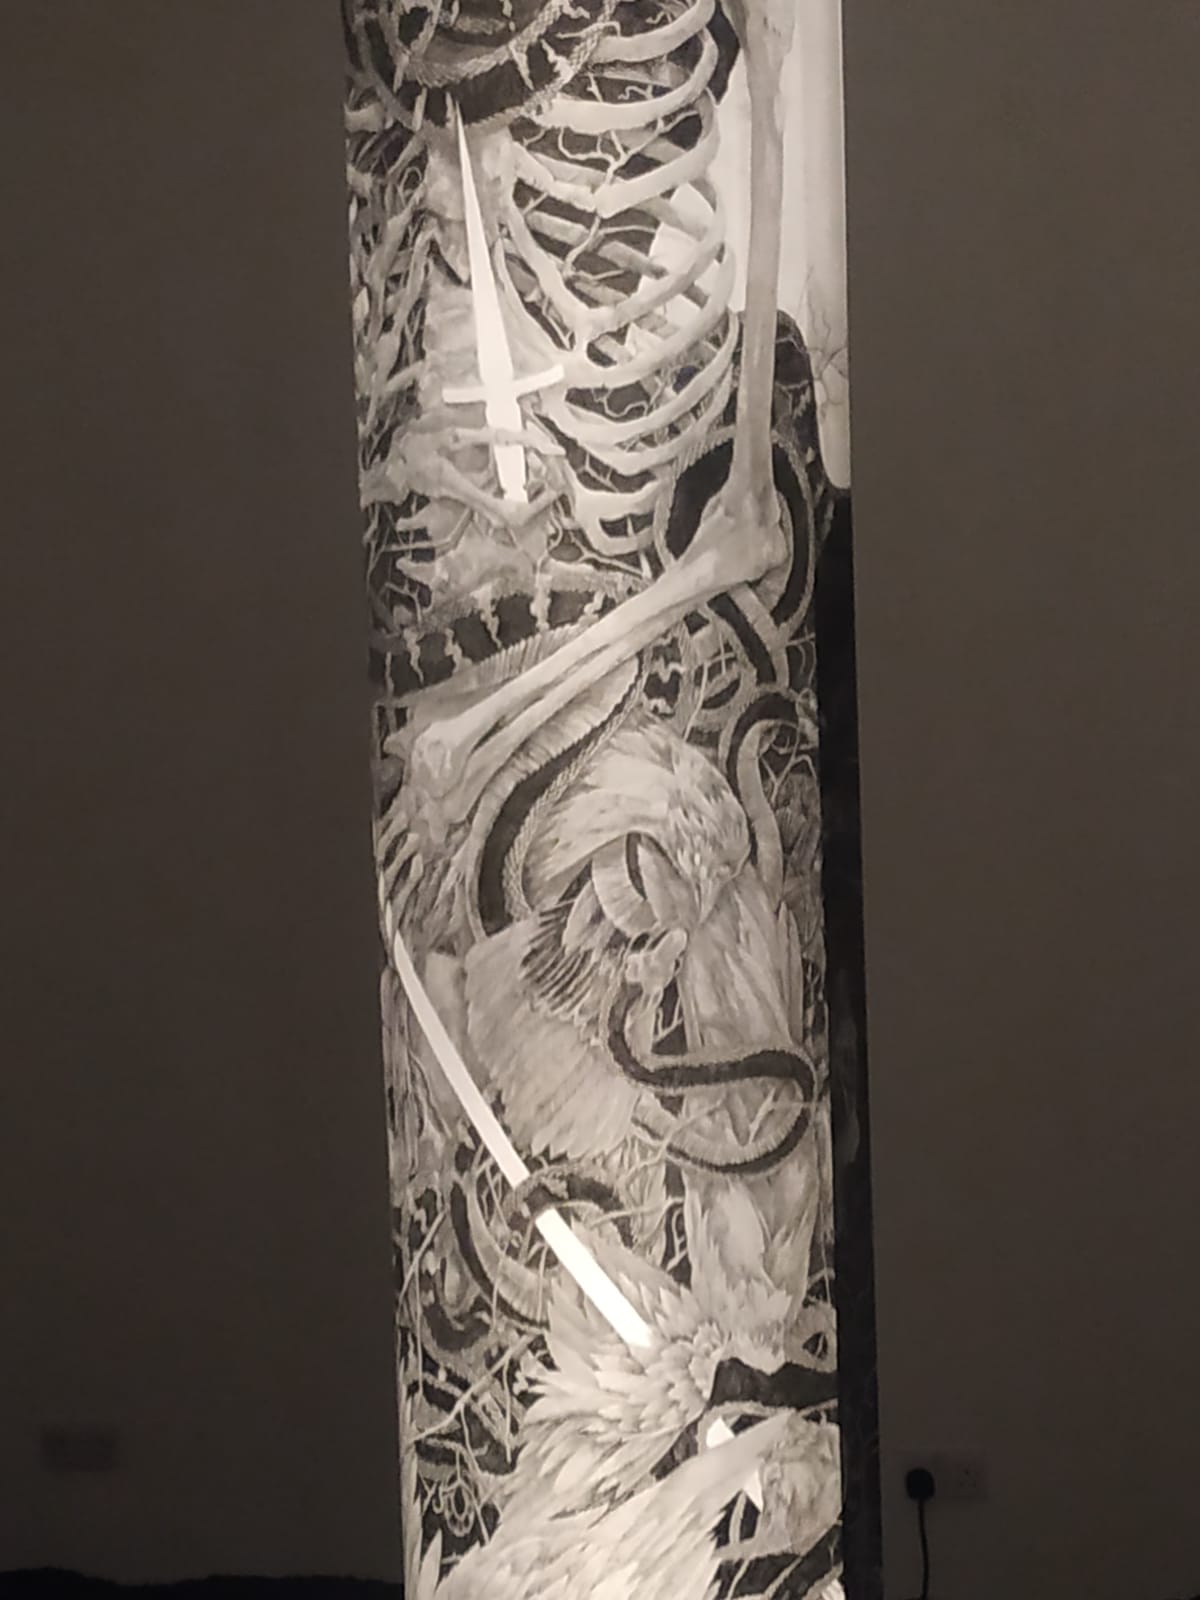 “ You Were a King Once – None of Us Are Getting Out Alive – Our Last Hope”.Unique 2021 Triptych – Ink and Graphite on tracing paper presented in backlit frames.  61x48x7cm each £5,500